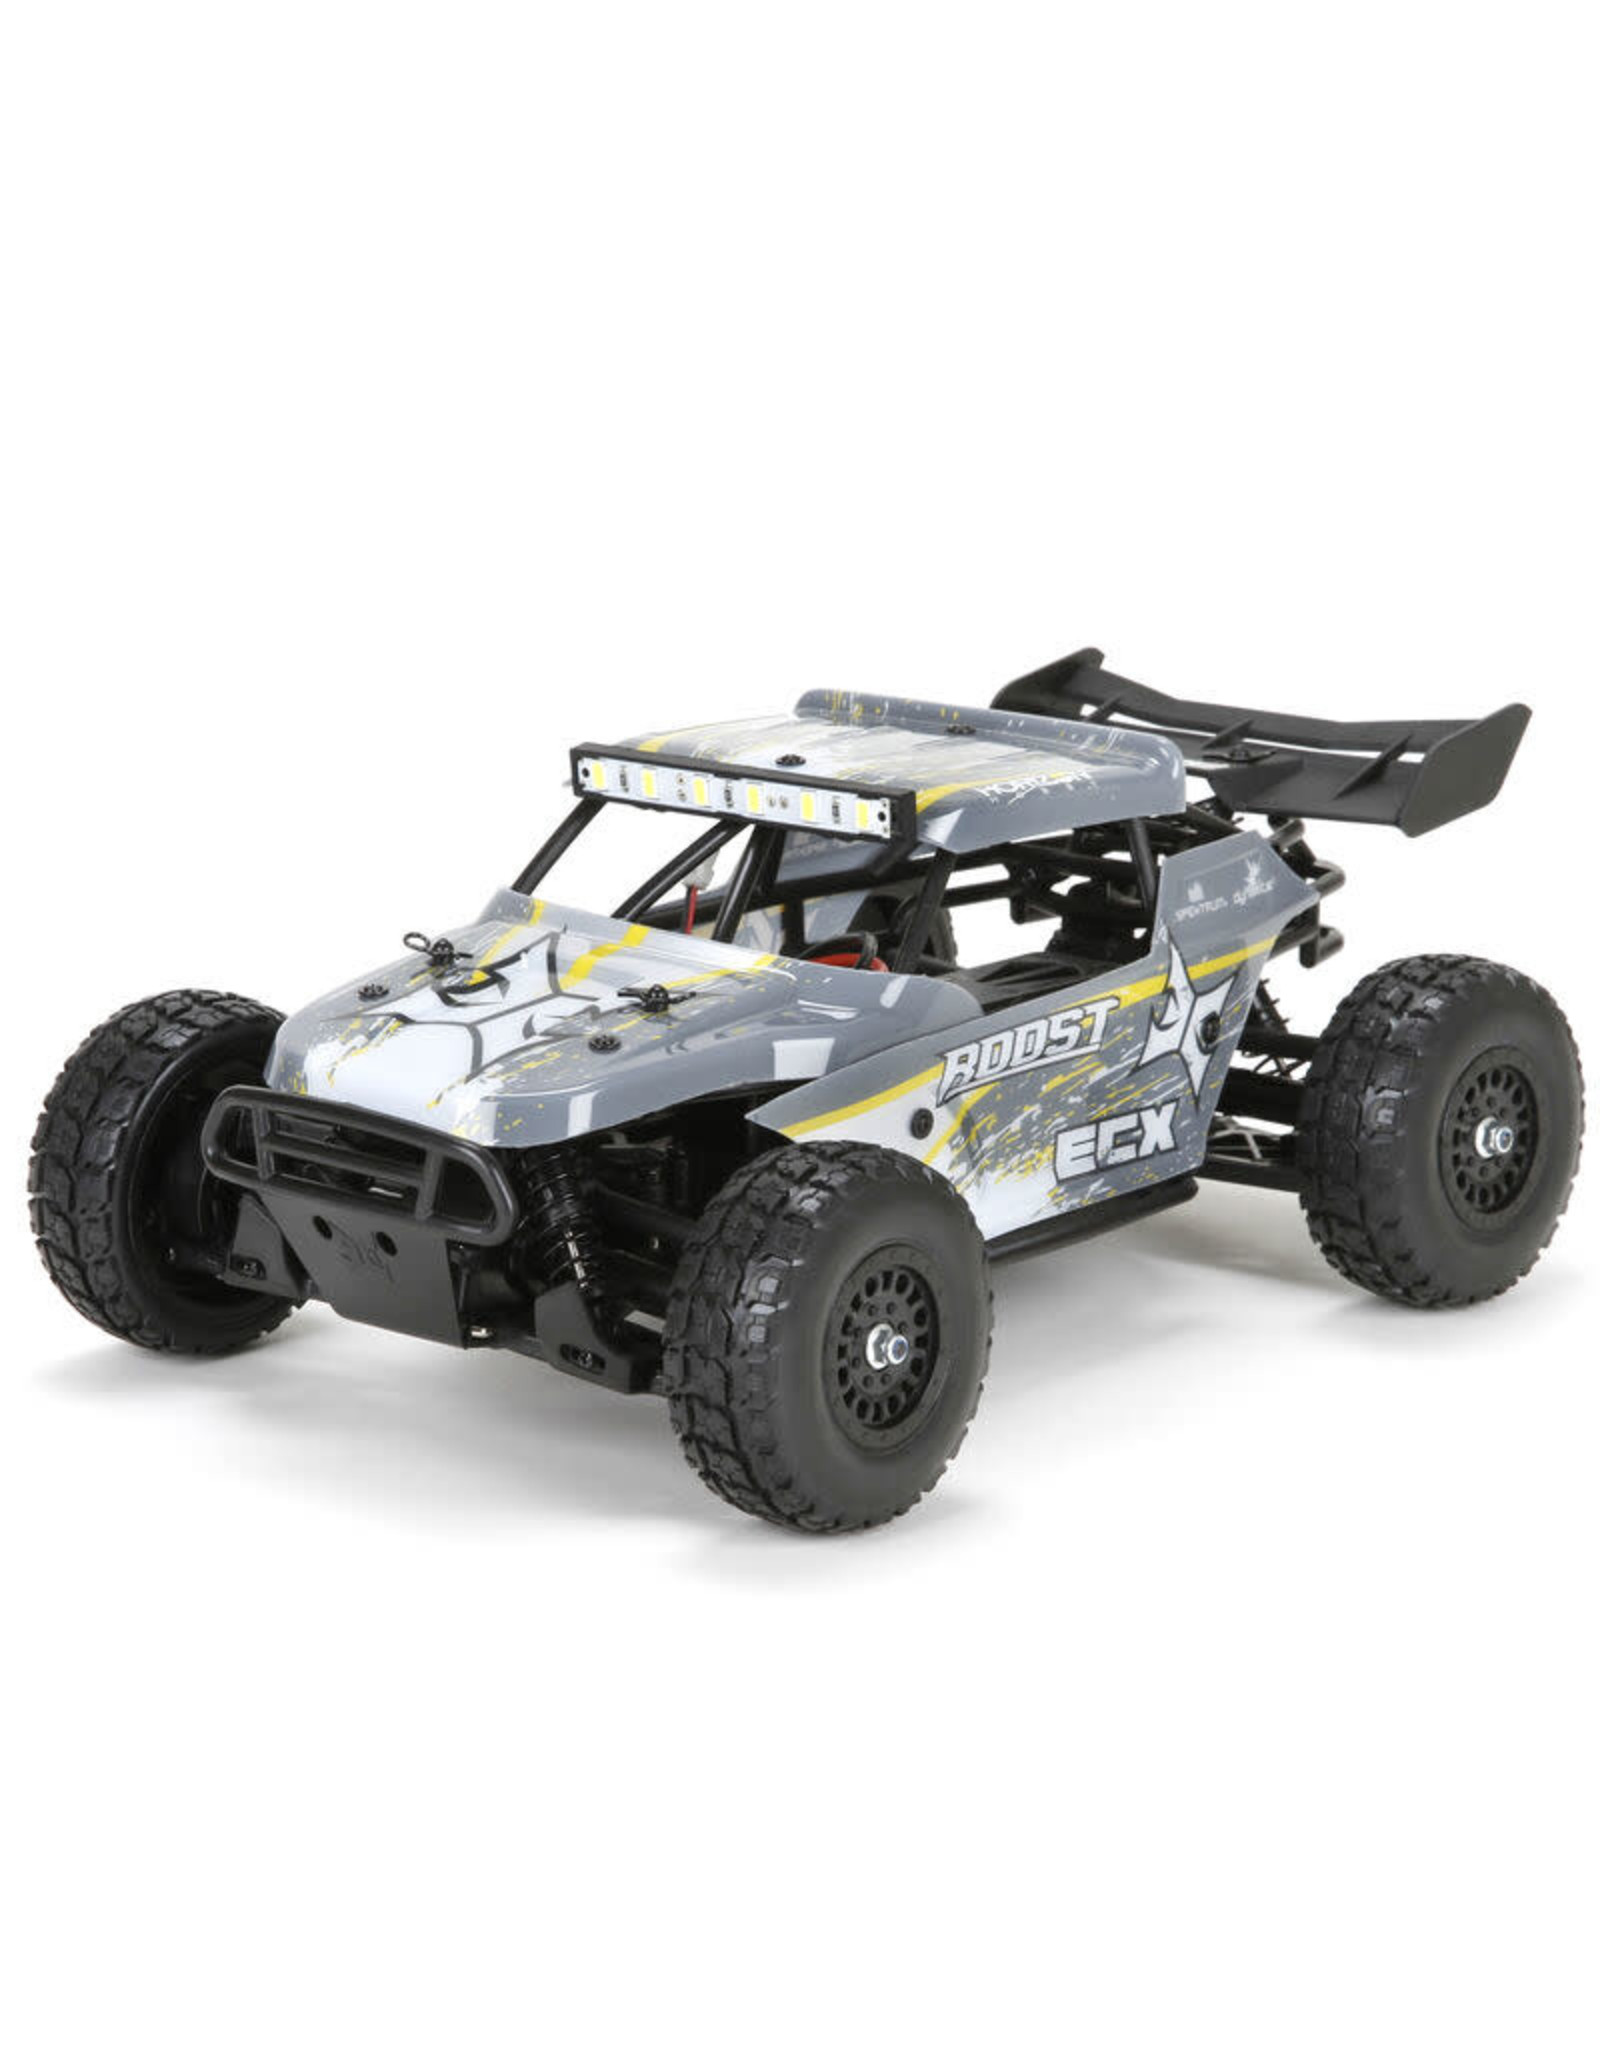 ECX 1/18 Roost 4WD Desert Buggy Brushed RTR, Grey/Yellow